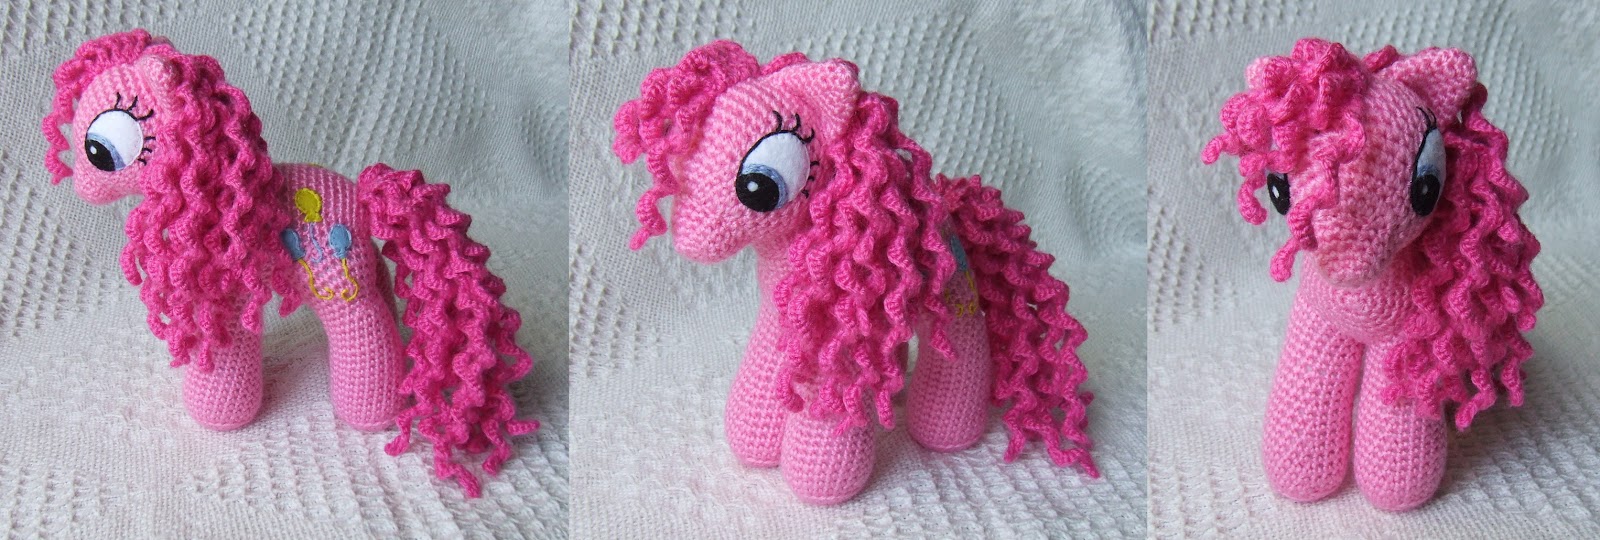 Knit One Awe Some: My Little Pony: Friendship is Magic